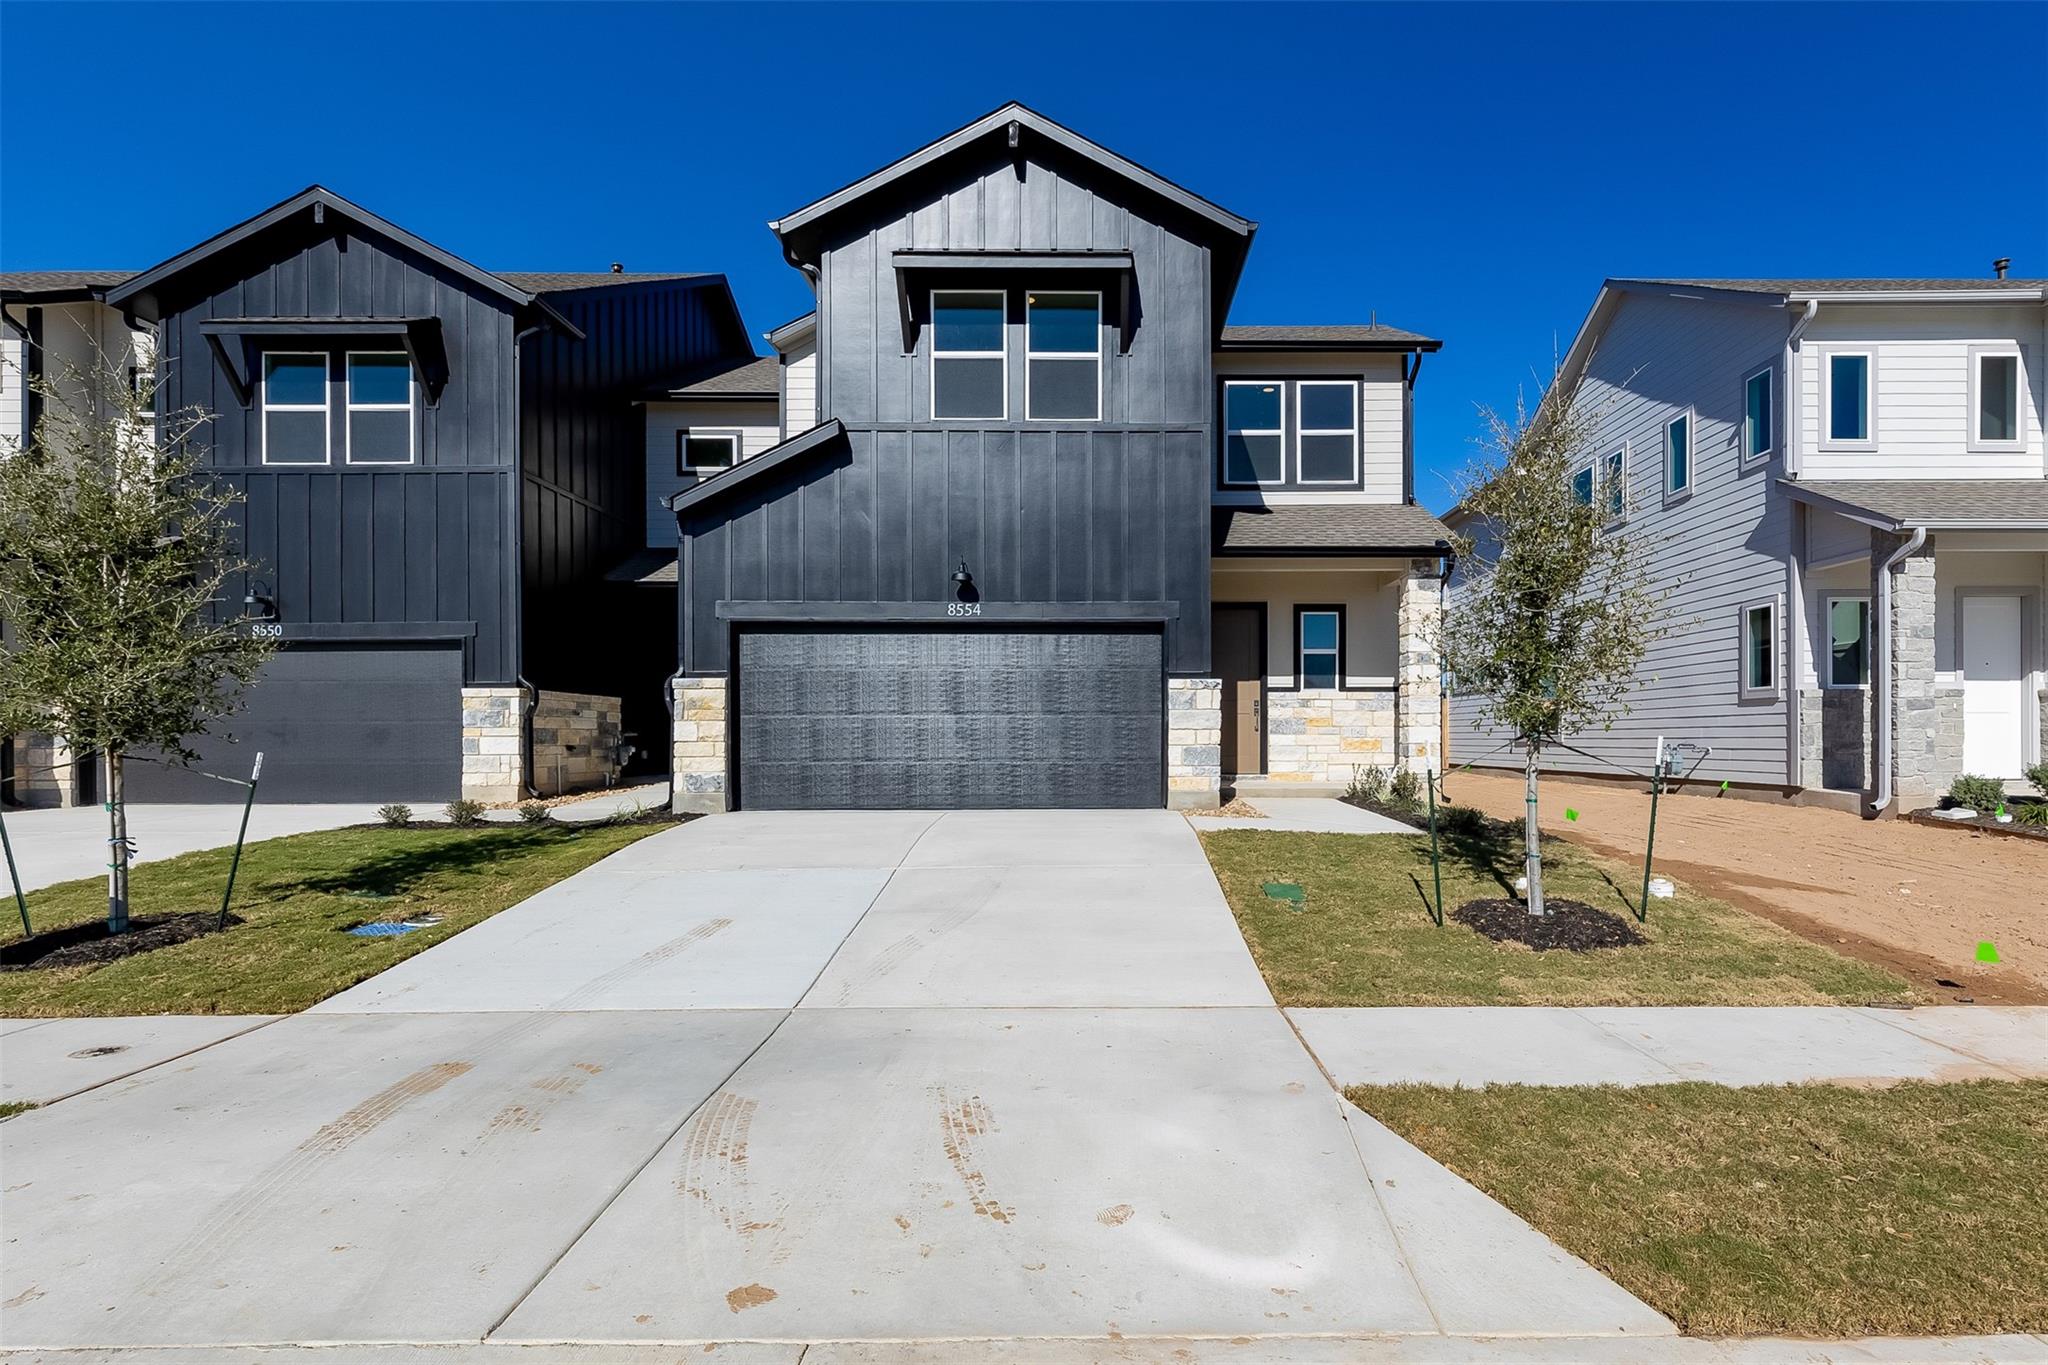 View Round Rock, TX 78665 townhome